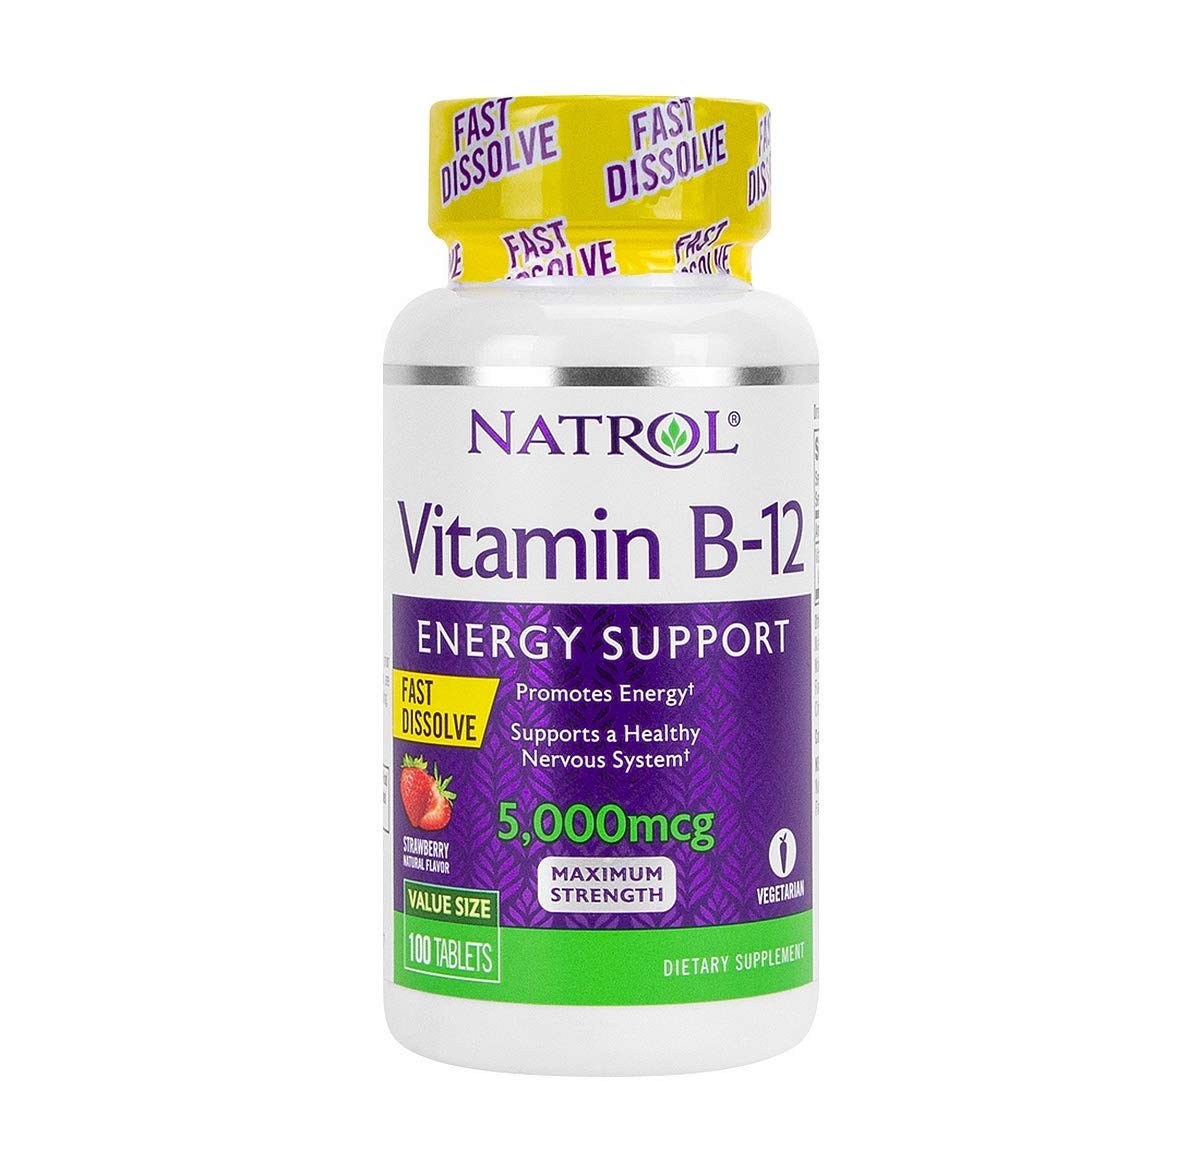 Natrol Vitamin B12 Fast Dissolve Tablets, Promotes Energy, Supports a Healthy Nervous System, Maximum Strength, Strawberry Flavor, 5,000mcg, 100 Count